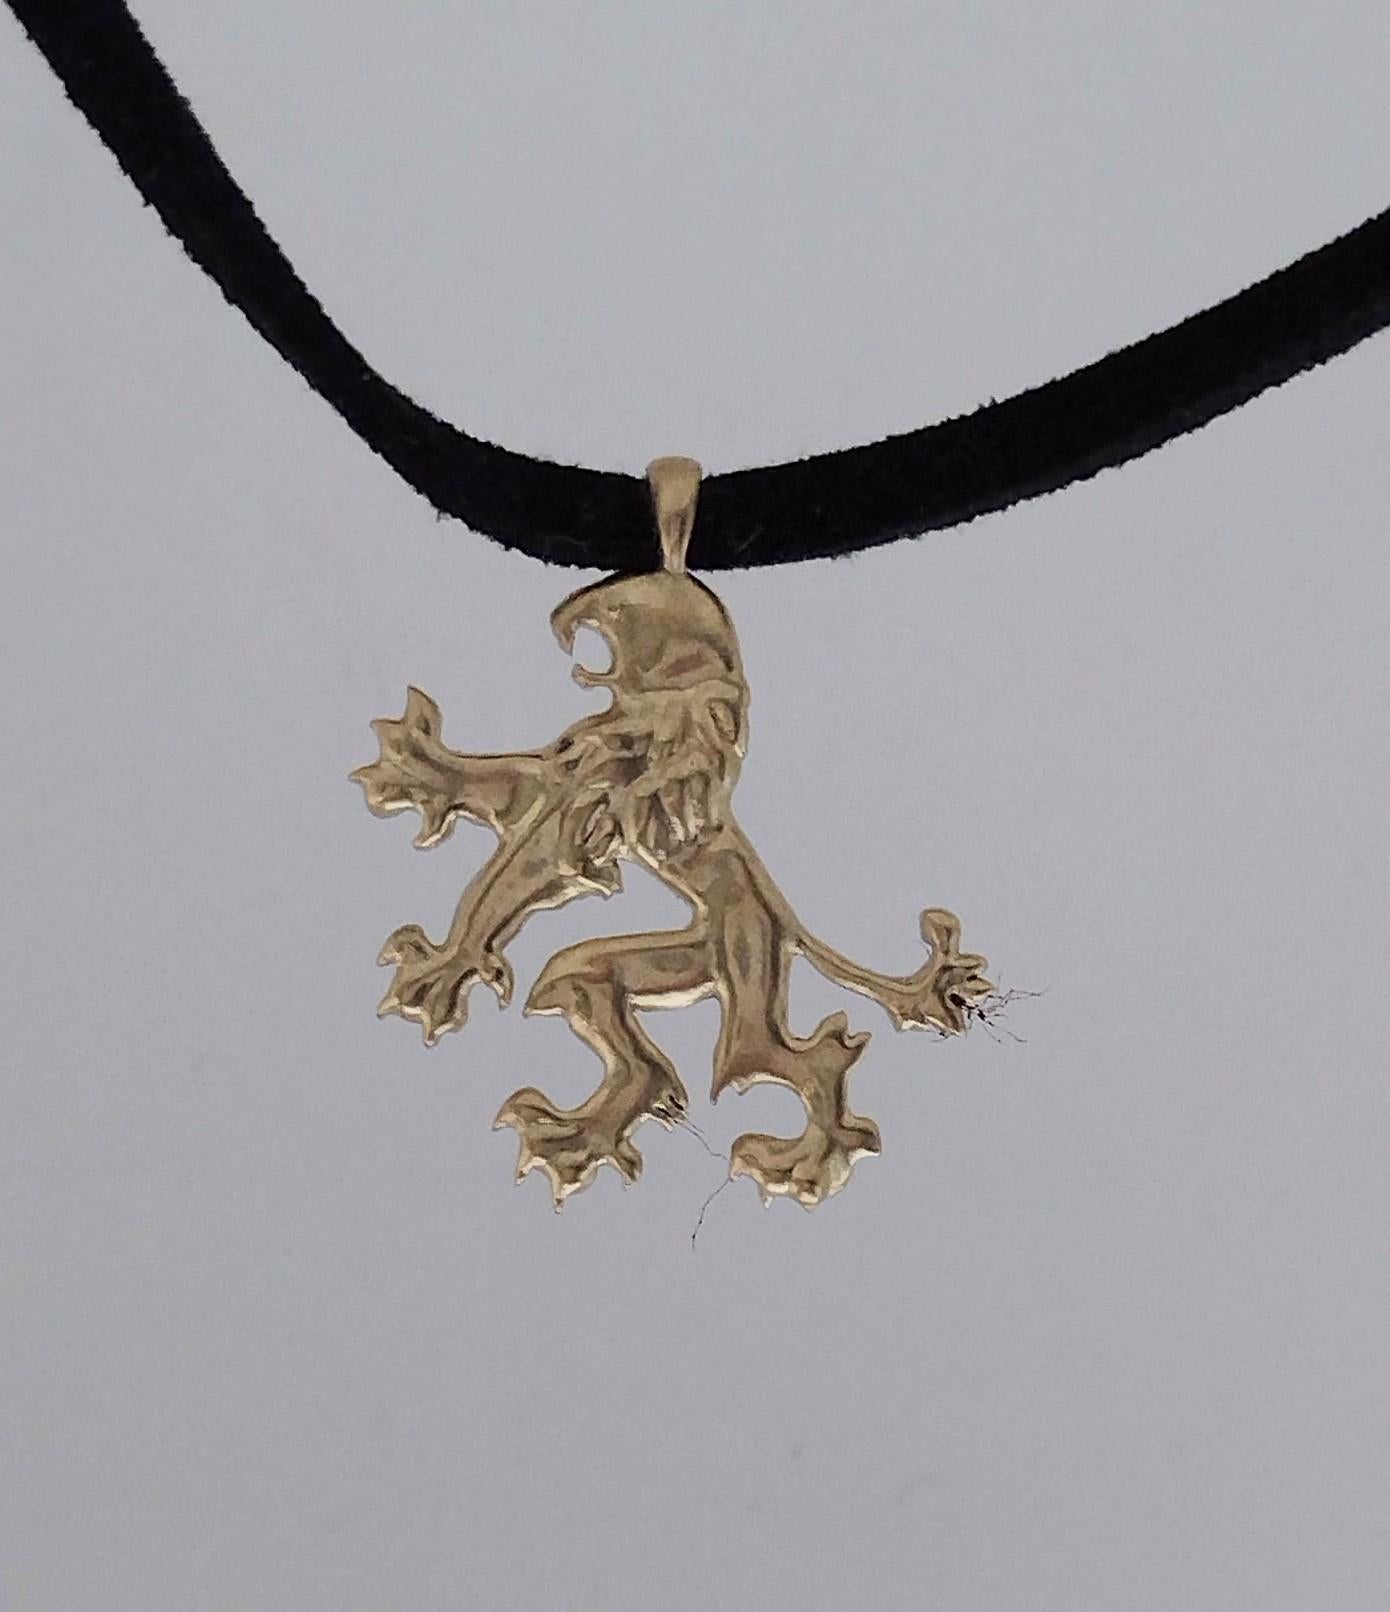 18 Karat Yellow Gold Lion Rampant Pendant Necklace, Free standing lion ready to attack. Don't worry it's just a piece of 18k gold.  From my cycling trip to Prague, Czech Republic. I couldn't help but save a coin to sculpt this fabulous lion rampant.